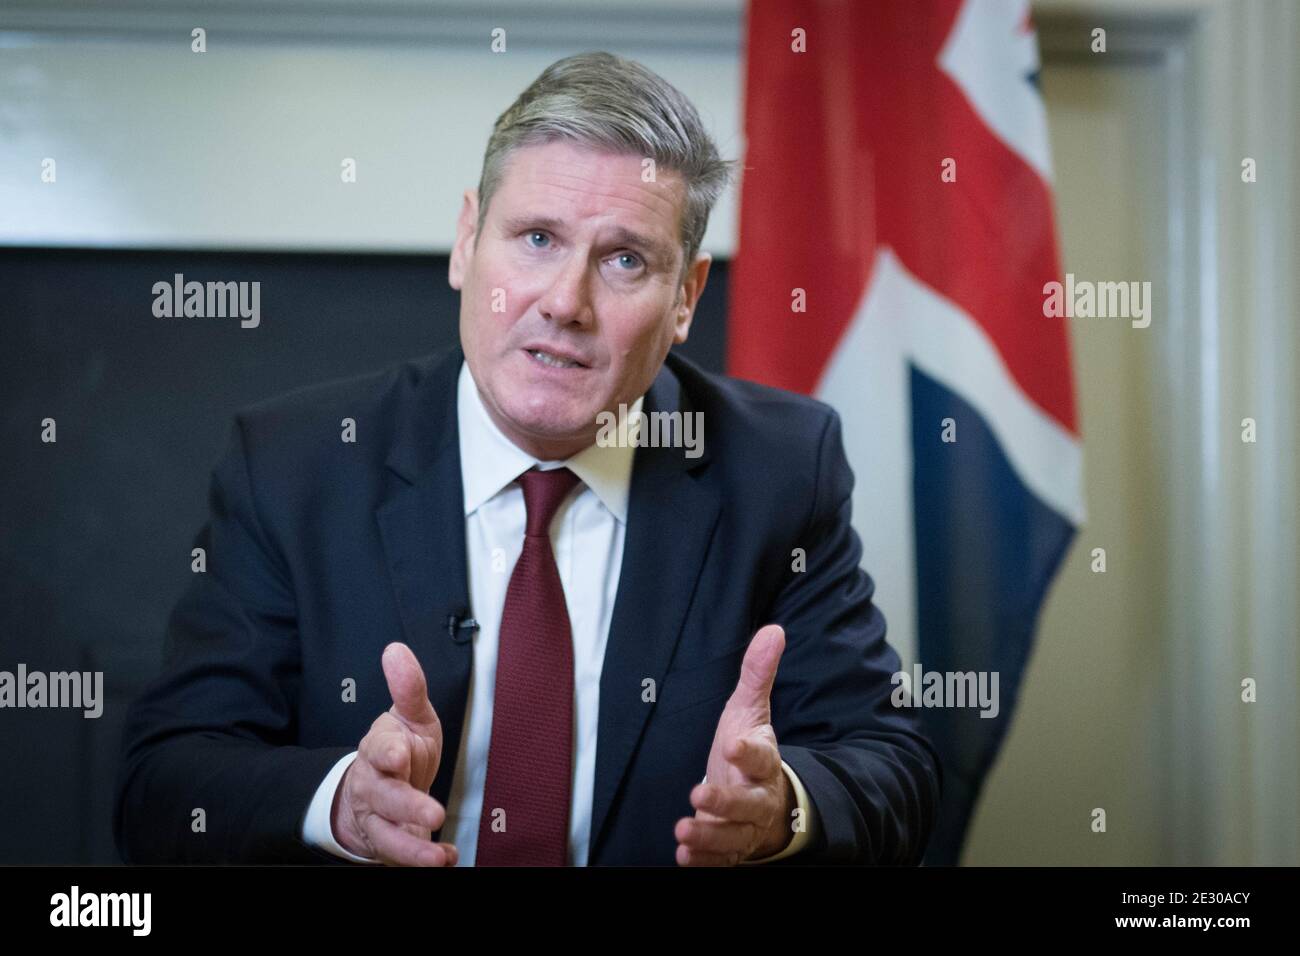 File photo dated 5/1/20121 of Labour leader Sir Keir Starmer who is to set out his 'optimistic' vision for a wide-ranging new relationship with the United States under Joe Biden. In a keynote address to the Fabian Society conference on Saturday, he will accuse Boris Johnson of getting too close to the outgoing president. Stock Photo